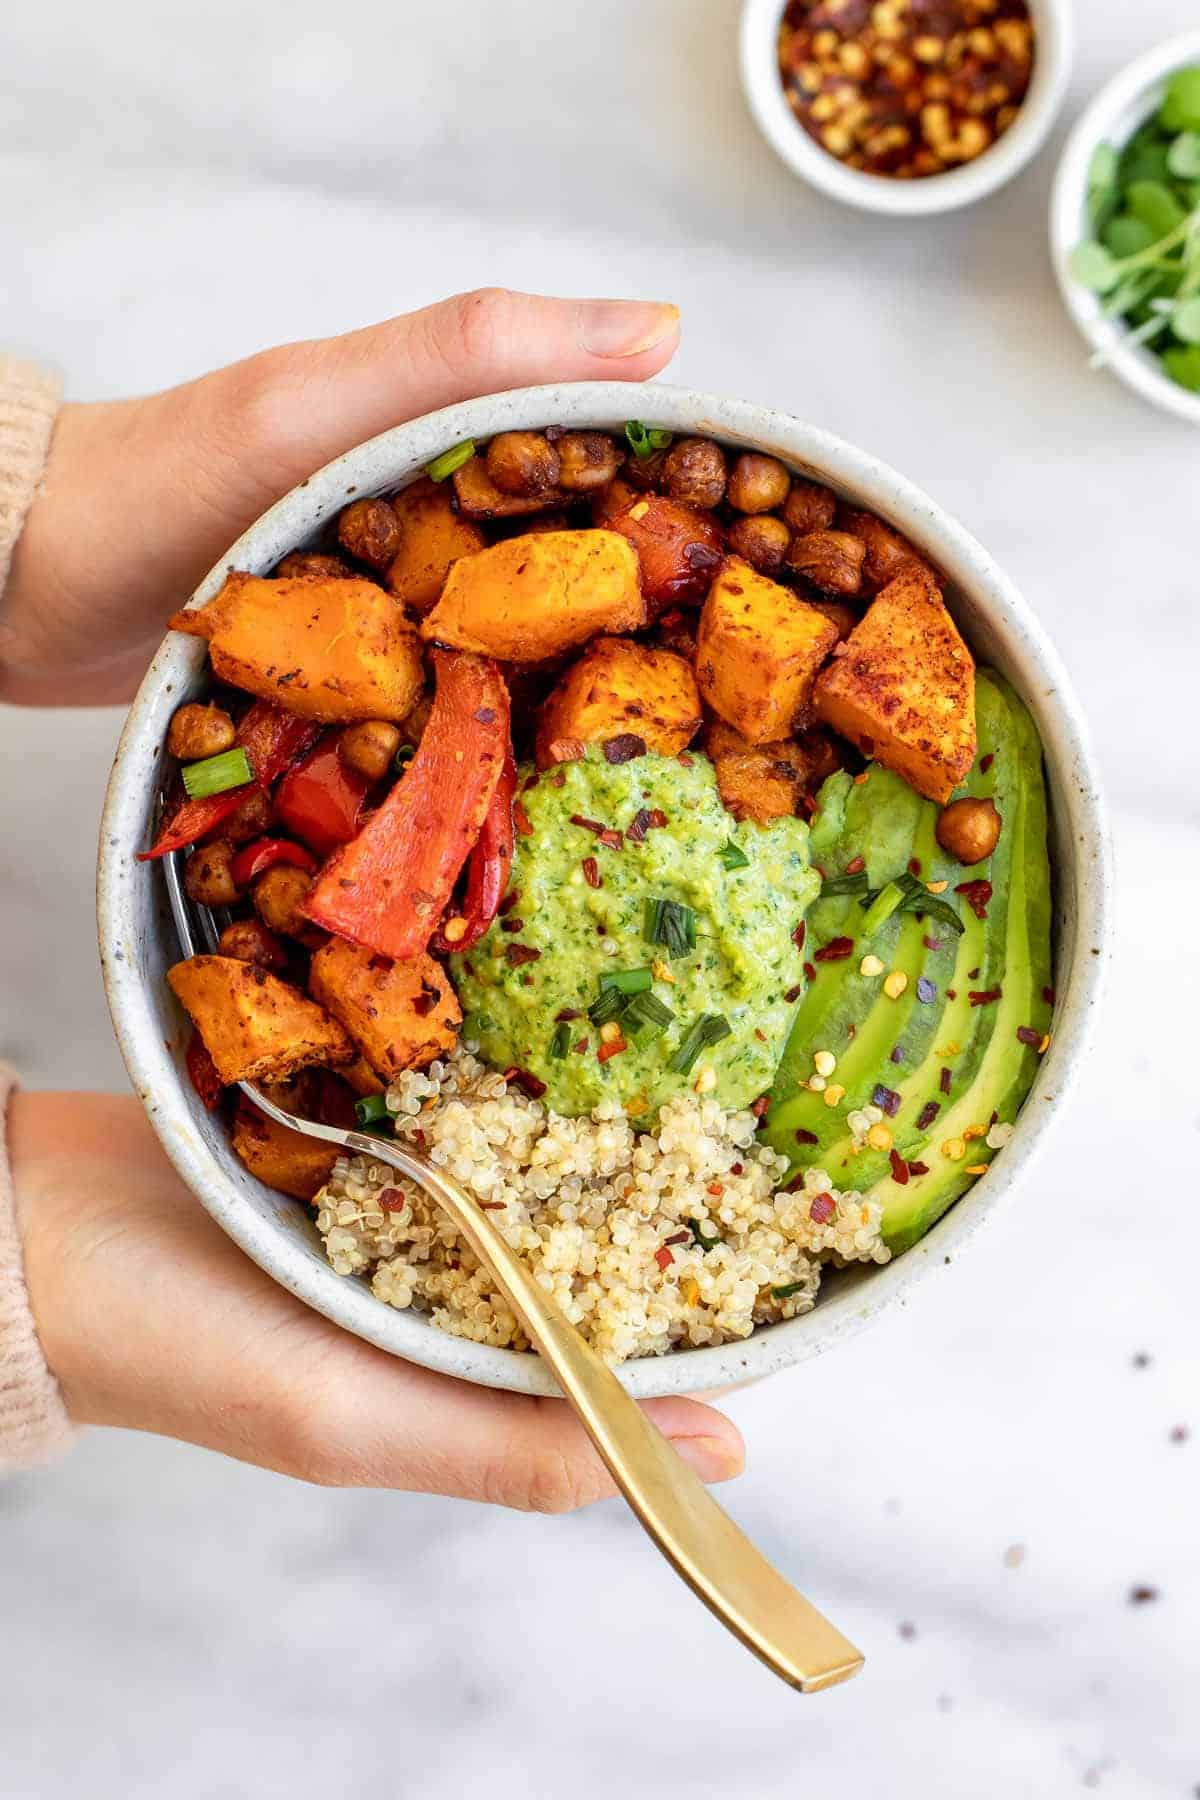 Two hands holding the bowl with the vegan sweet potato and chickpea recipe.